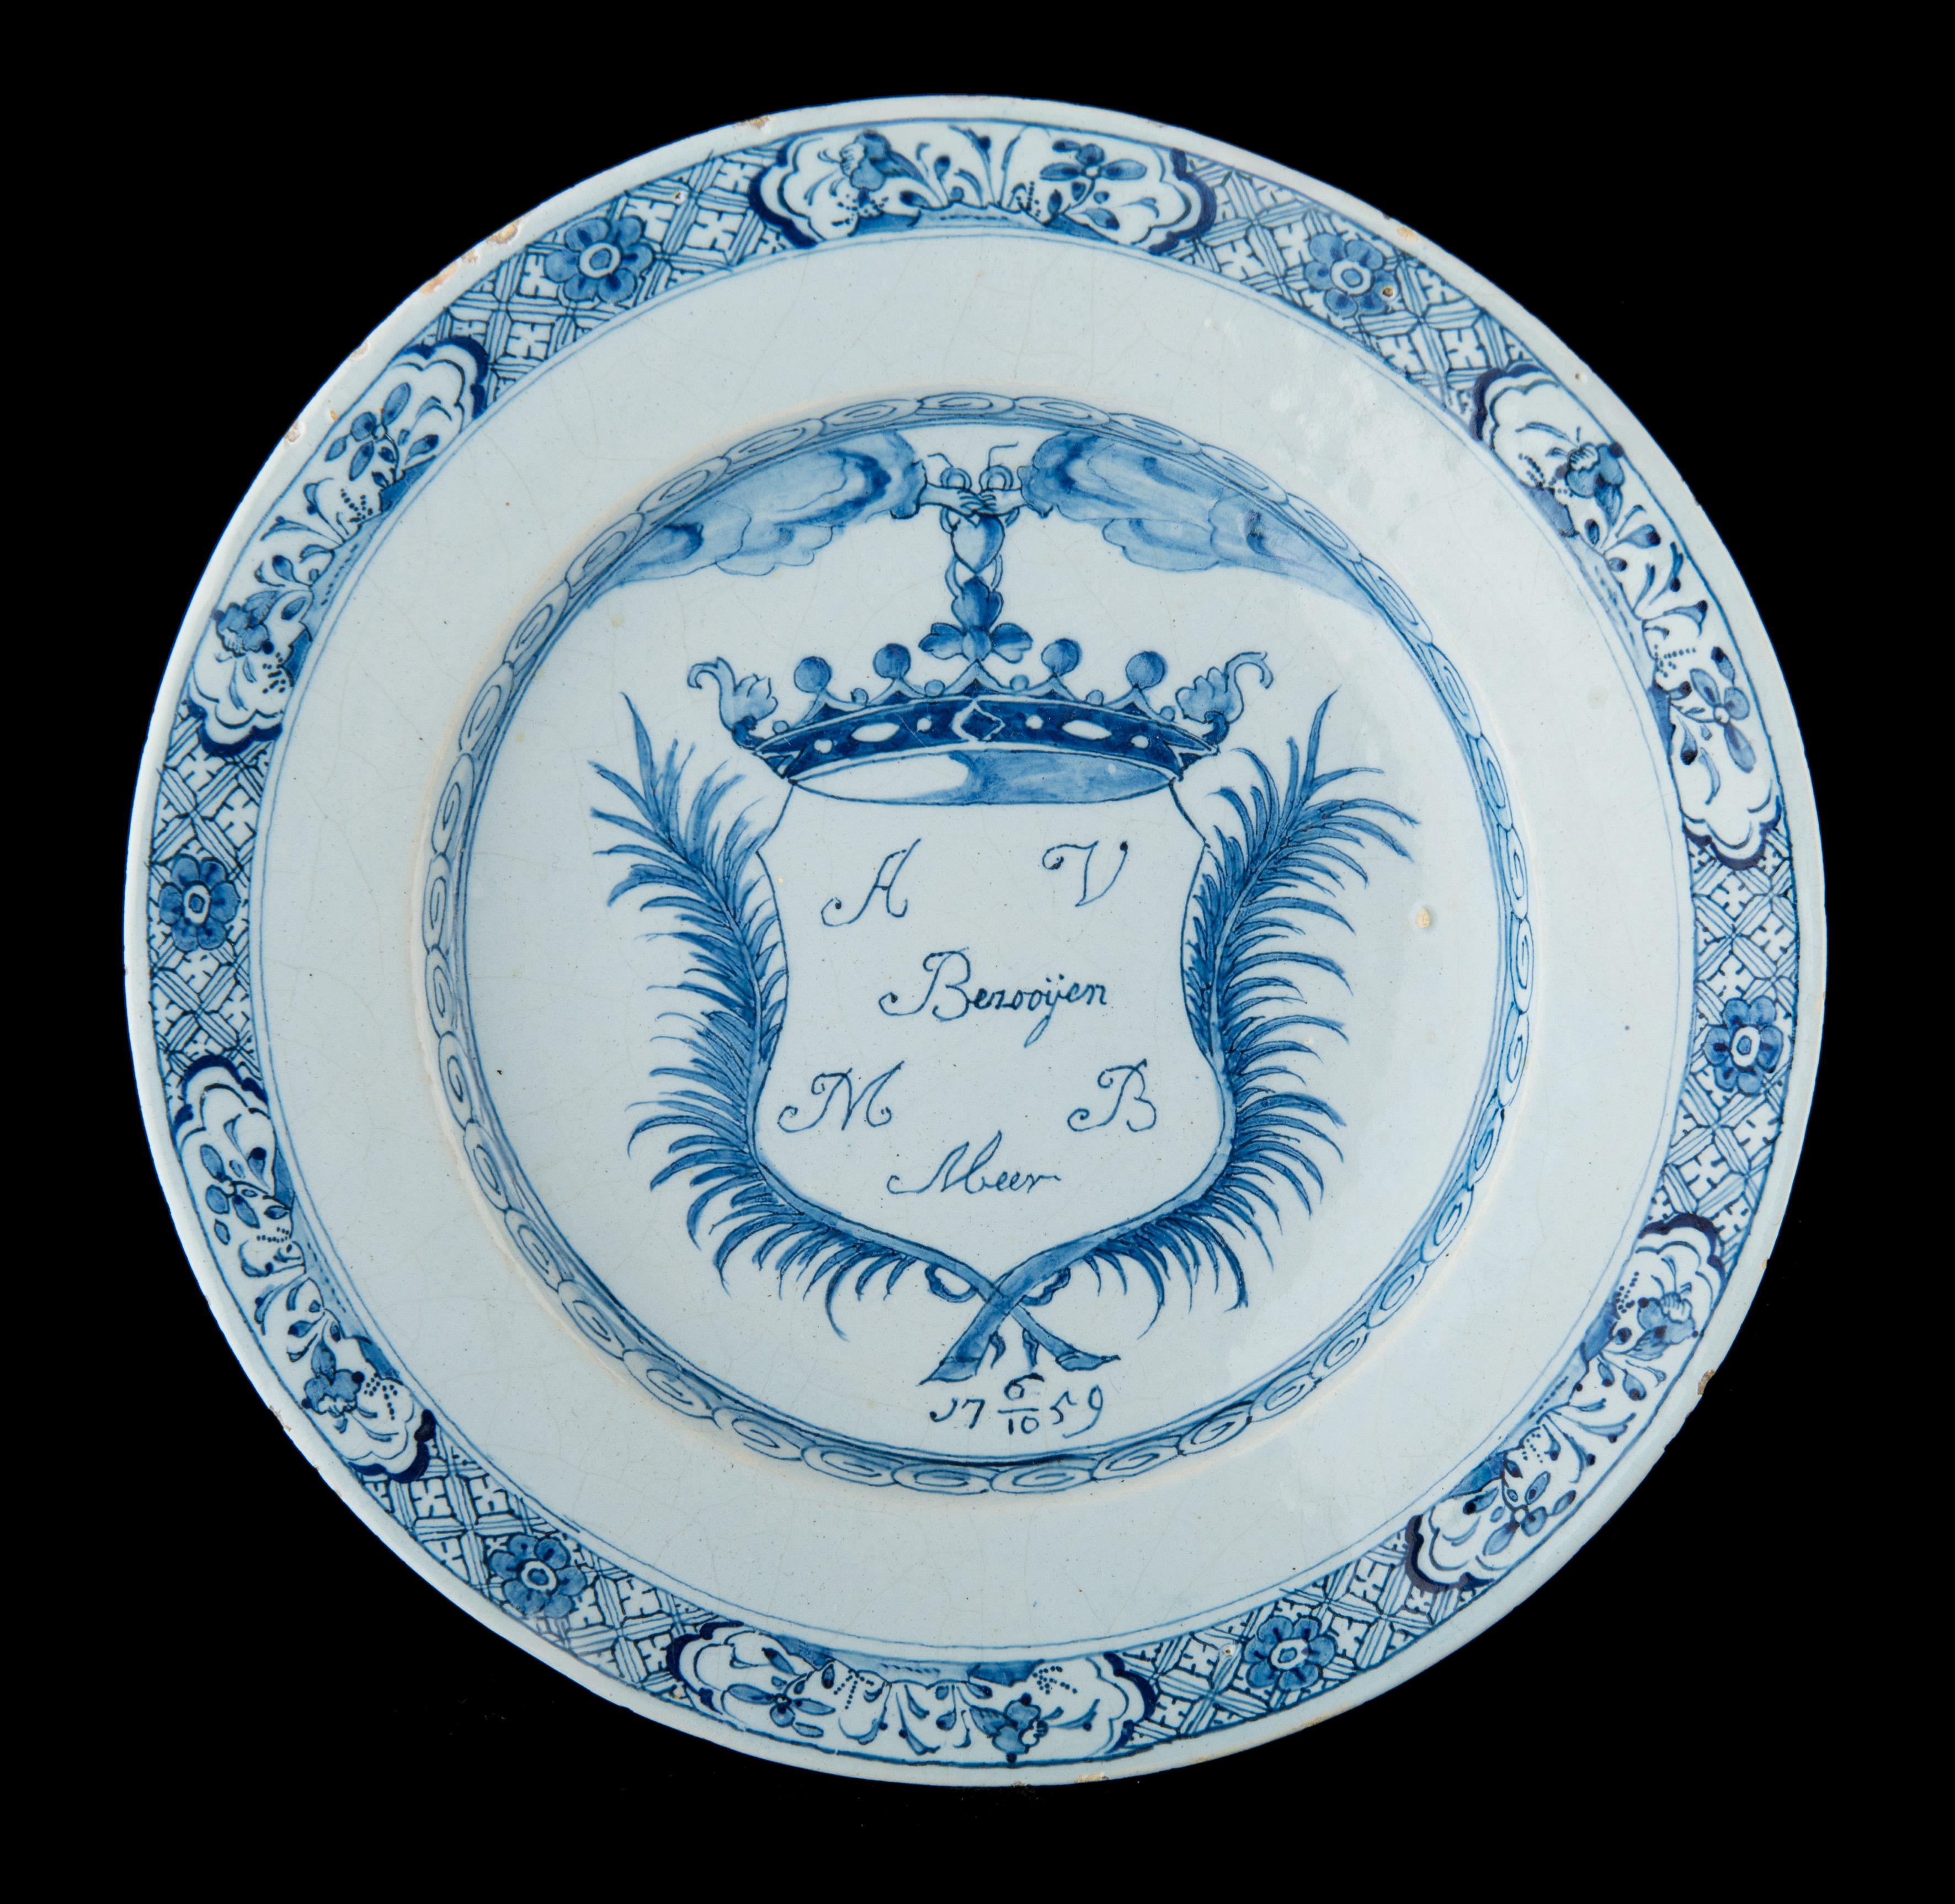 Blue and white marriage plate. Delft, dated 1759

The marriage plate is painted in blue with a crowned shield between two laurel wreaths. The shield is suspended from a heart held by two hands emerging from clouds on either side. The names of the